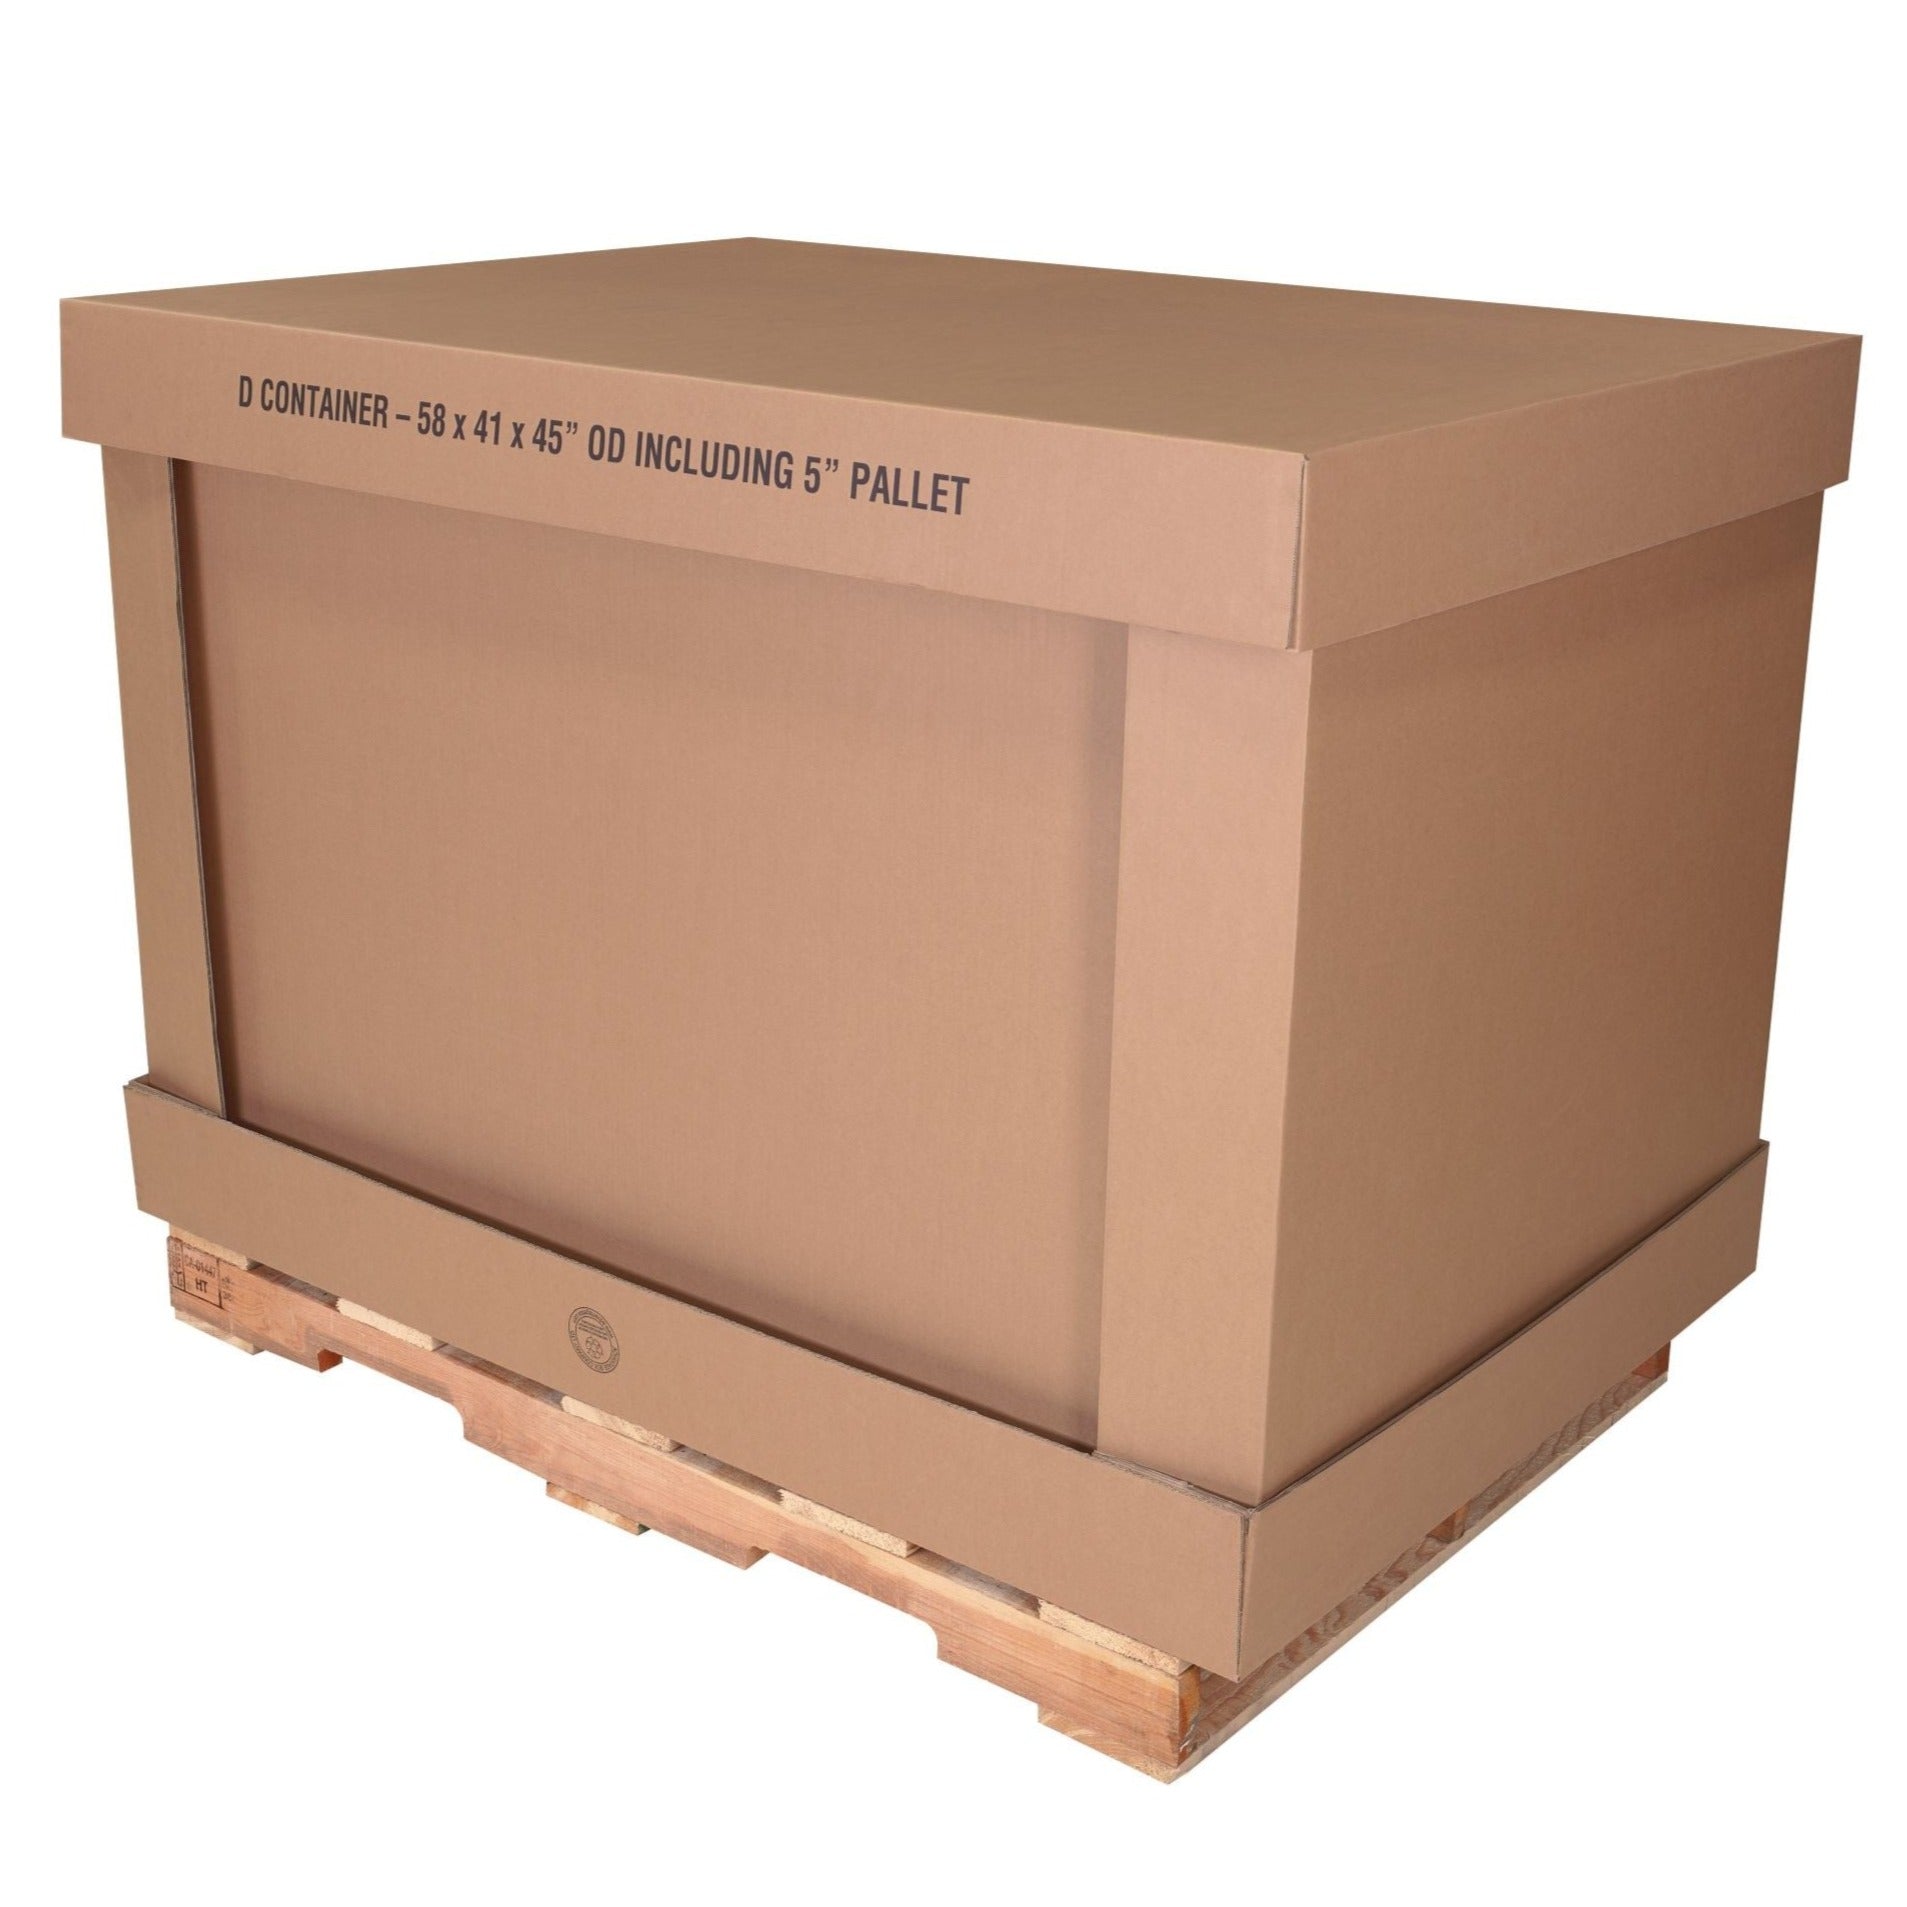 D Container (58 x 42 x 45) Bulk Cargo Box with Pallet by ASC, Inc.